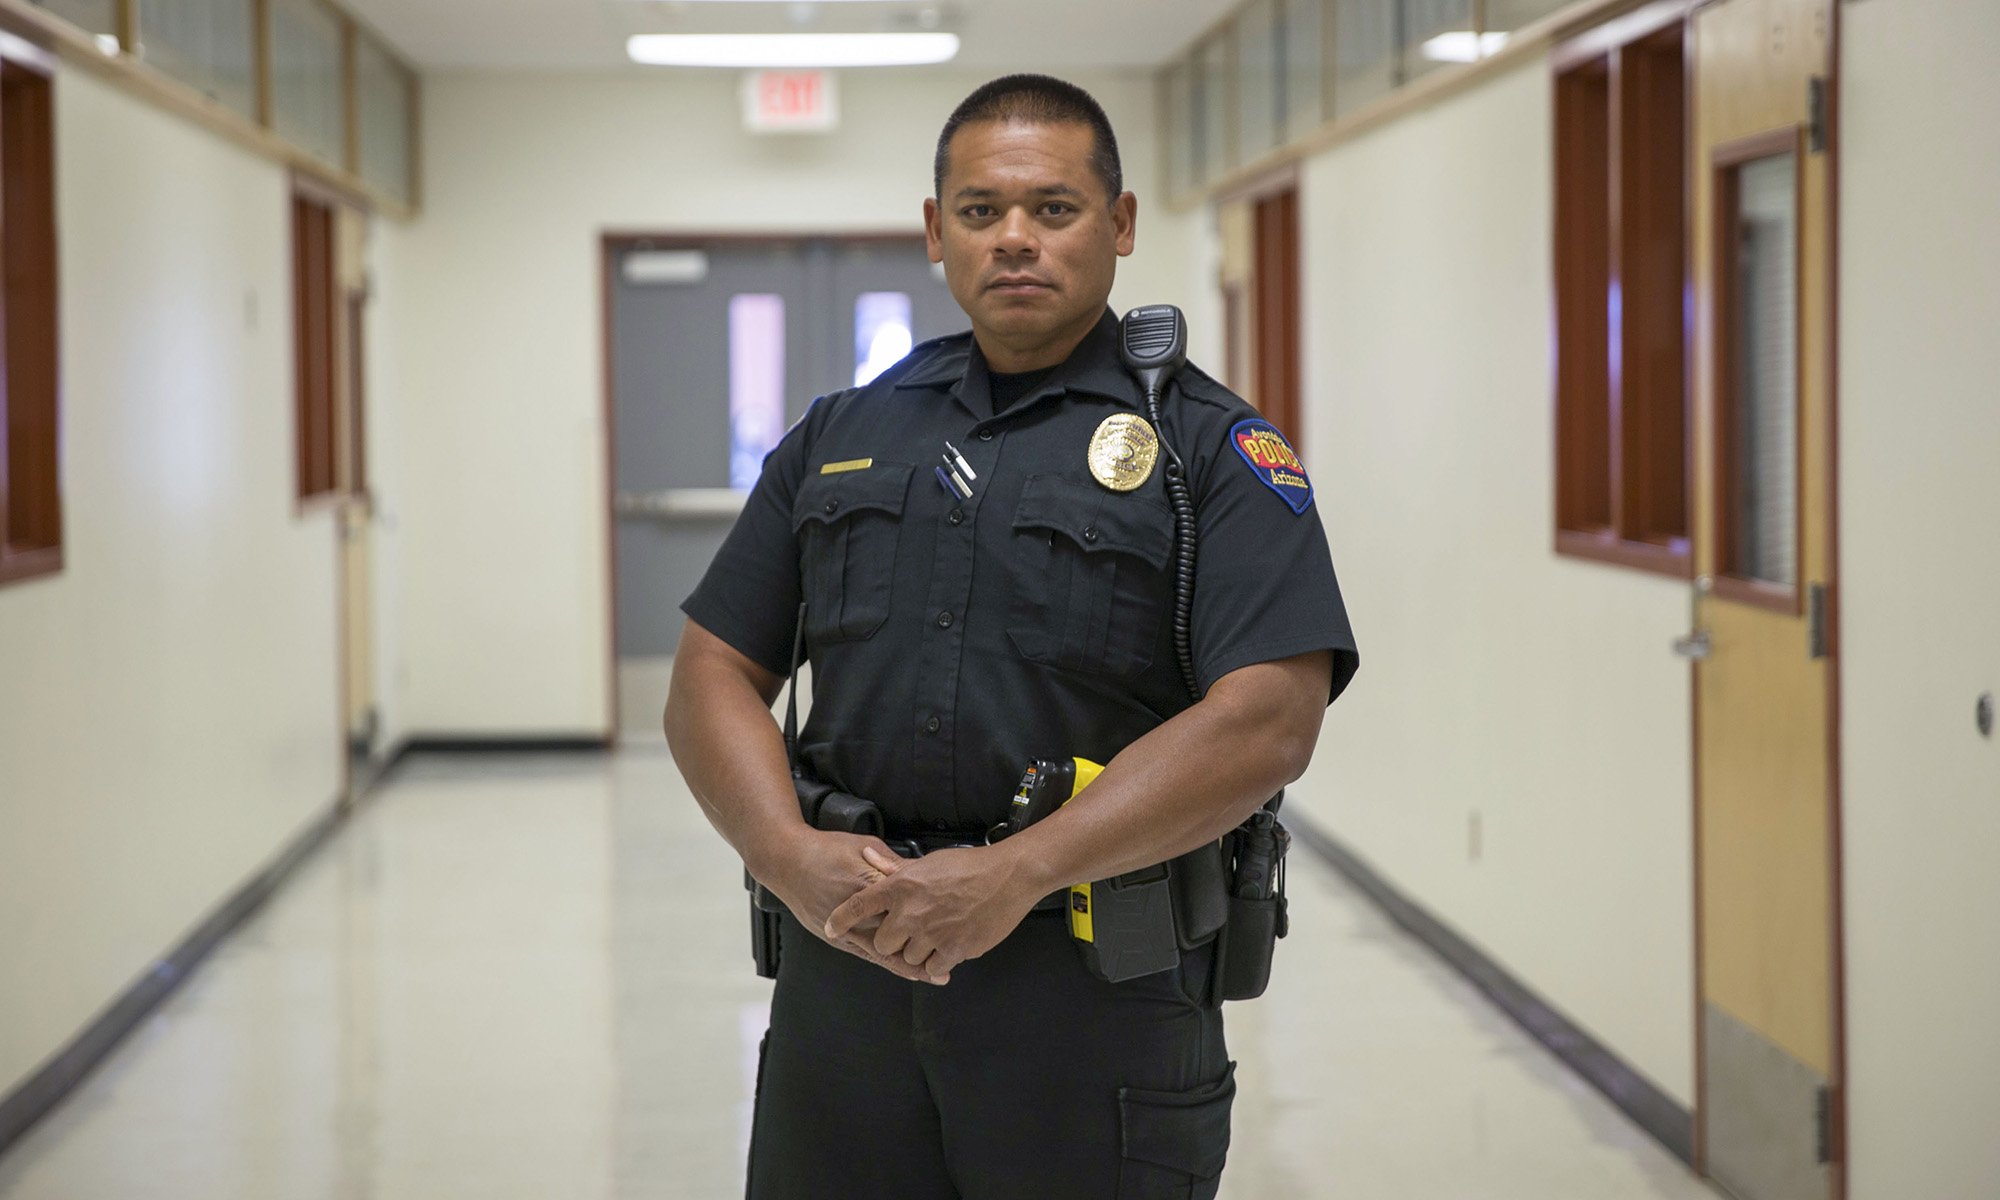 School resource officers hold the line on safety